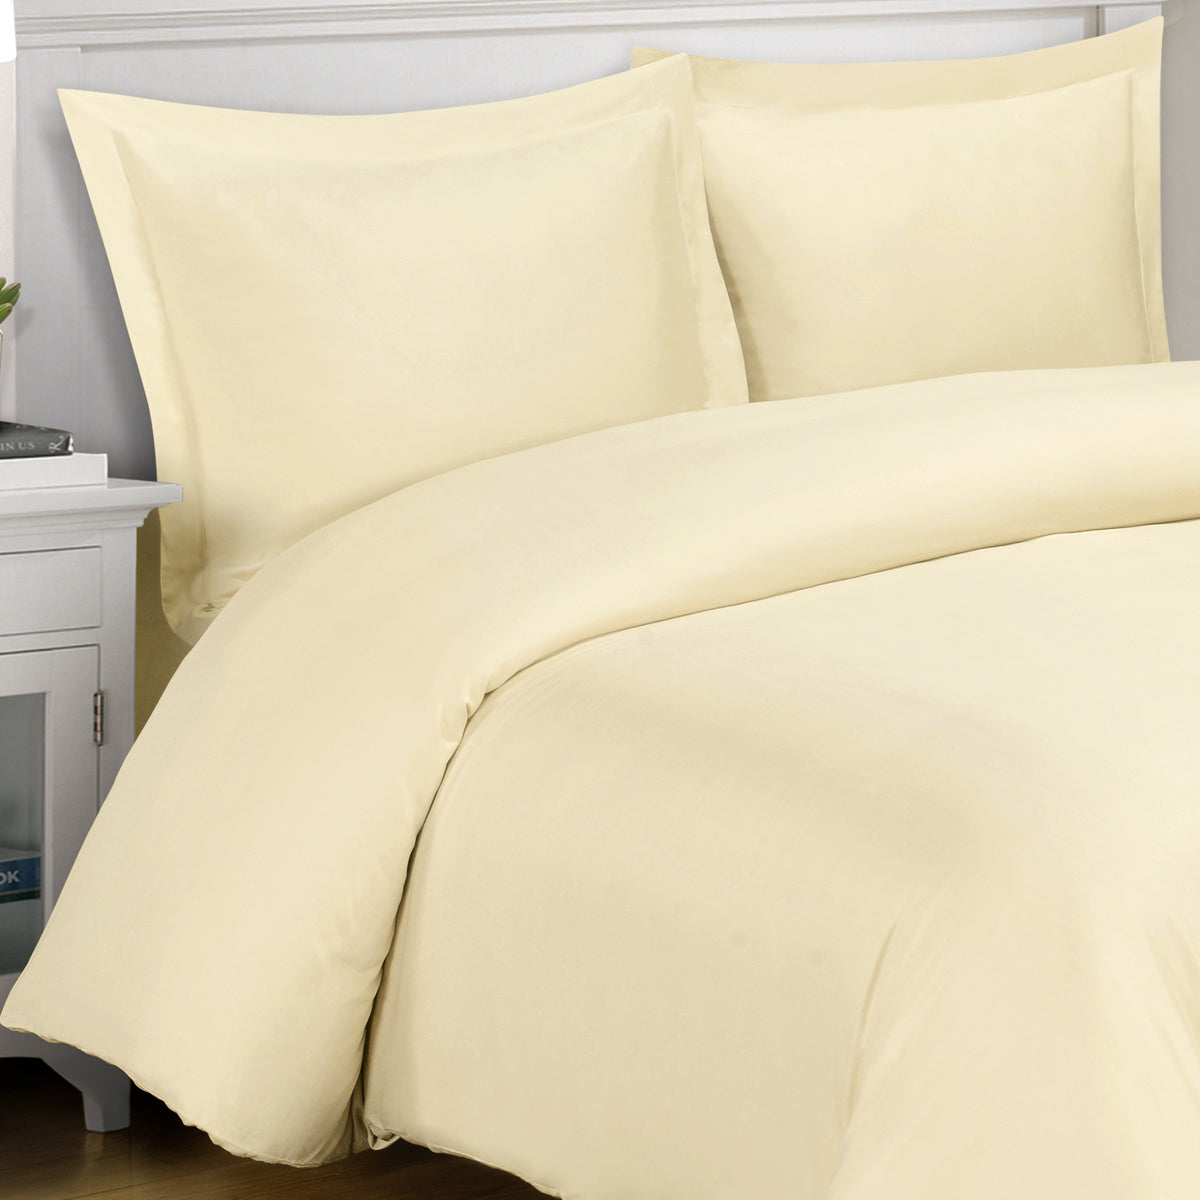 Twin-XL Flat Sheet Ivory Egyptian Cotton 1000 Thread Count at- Egyptianhomelinens.com